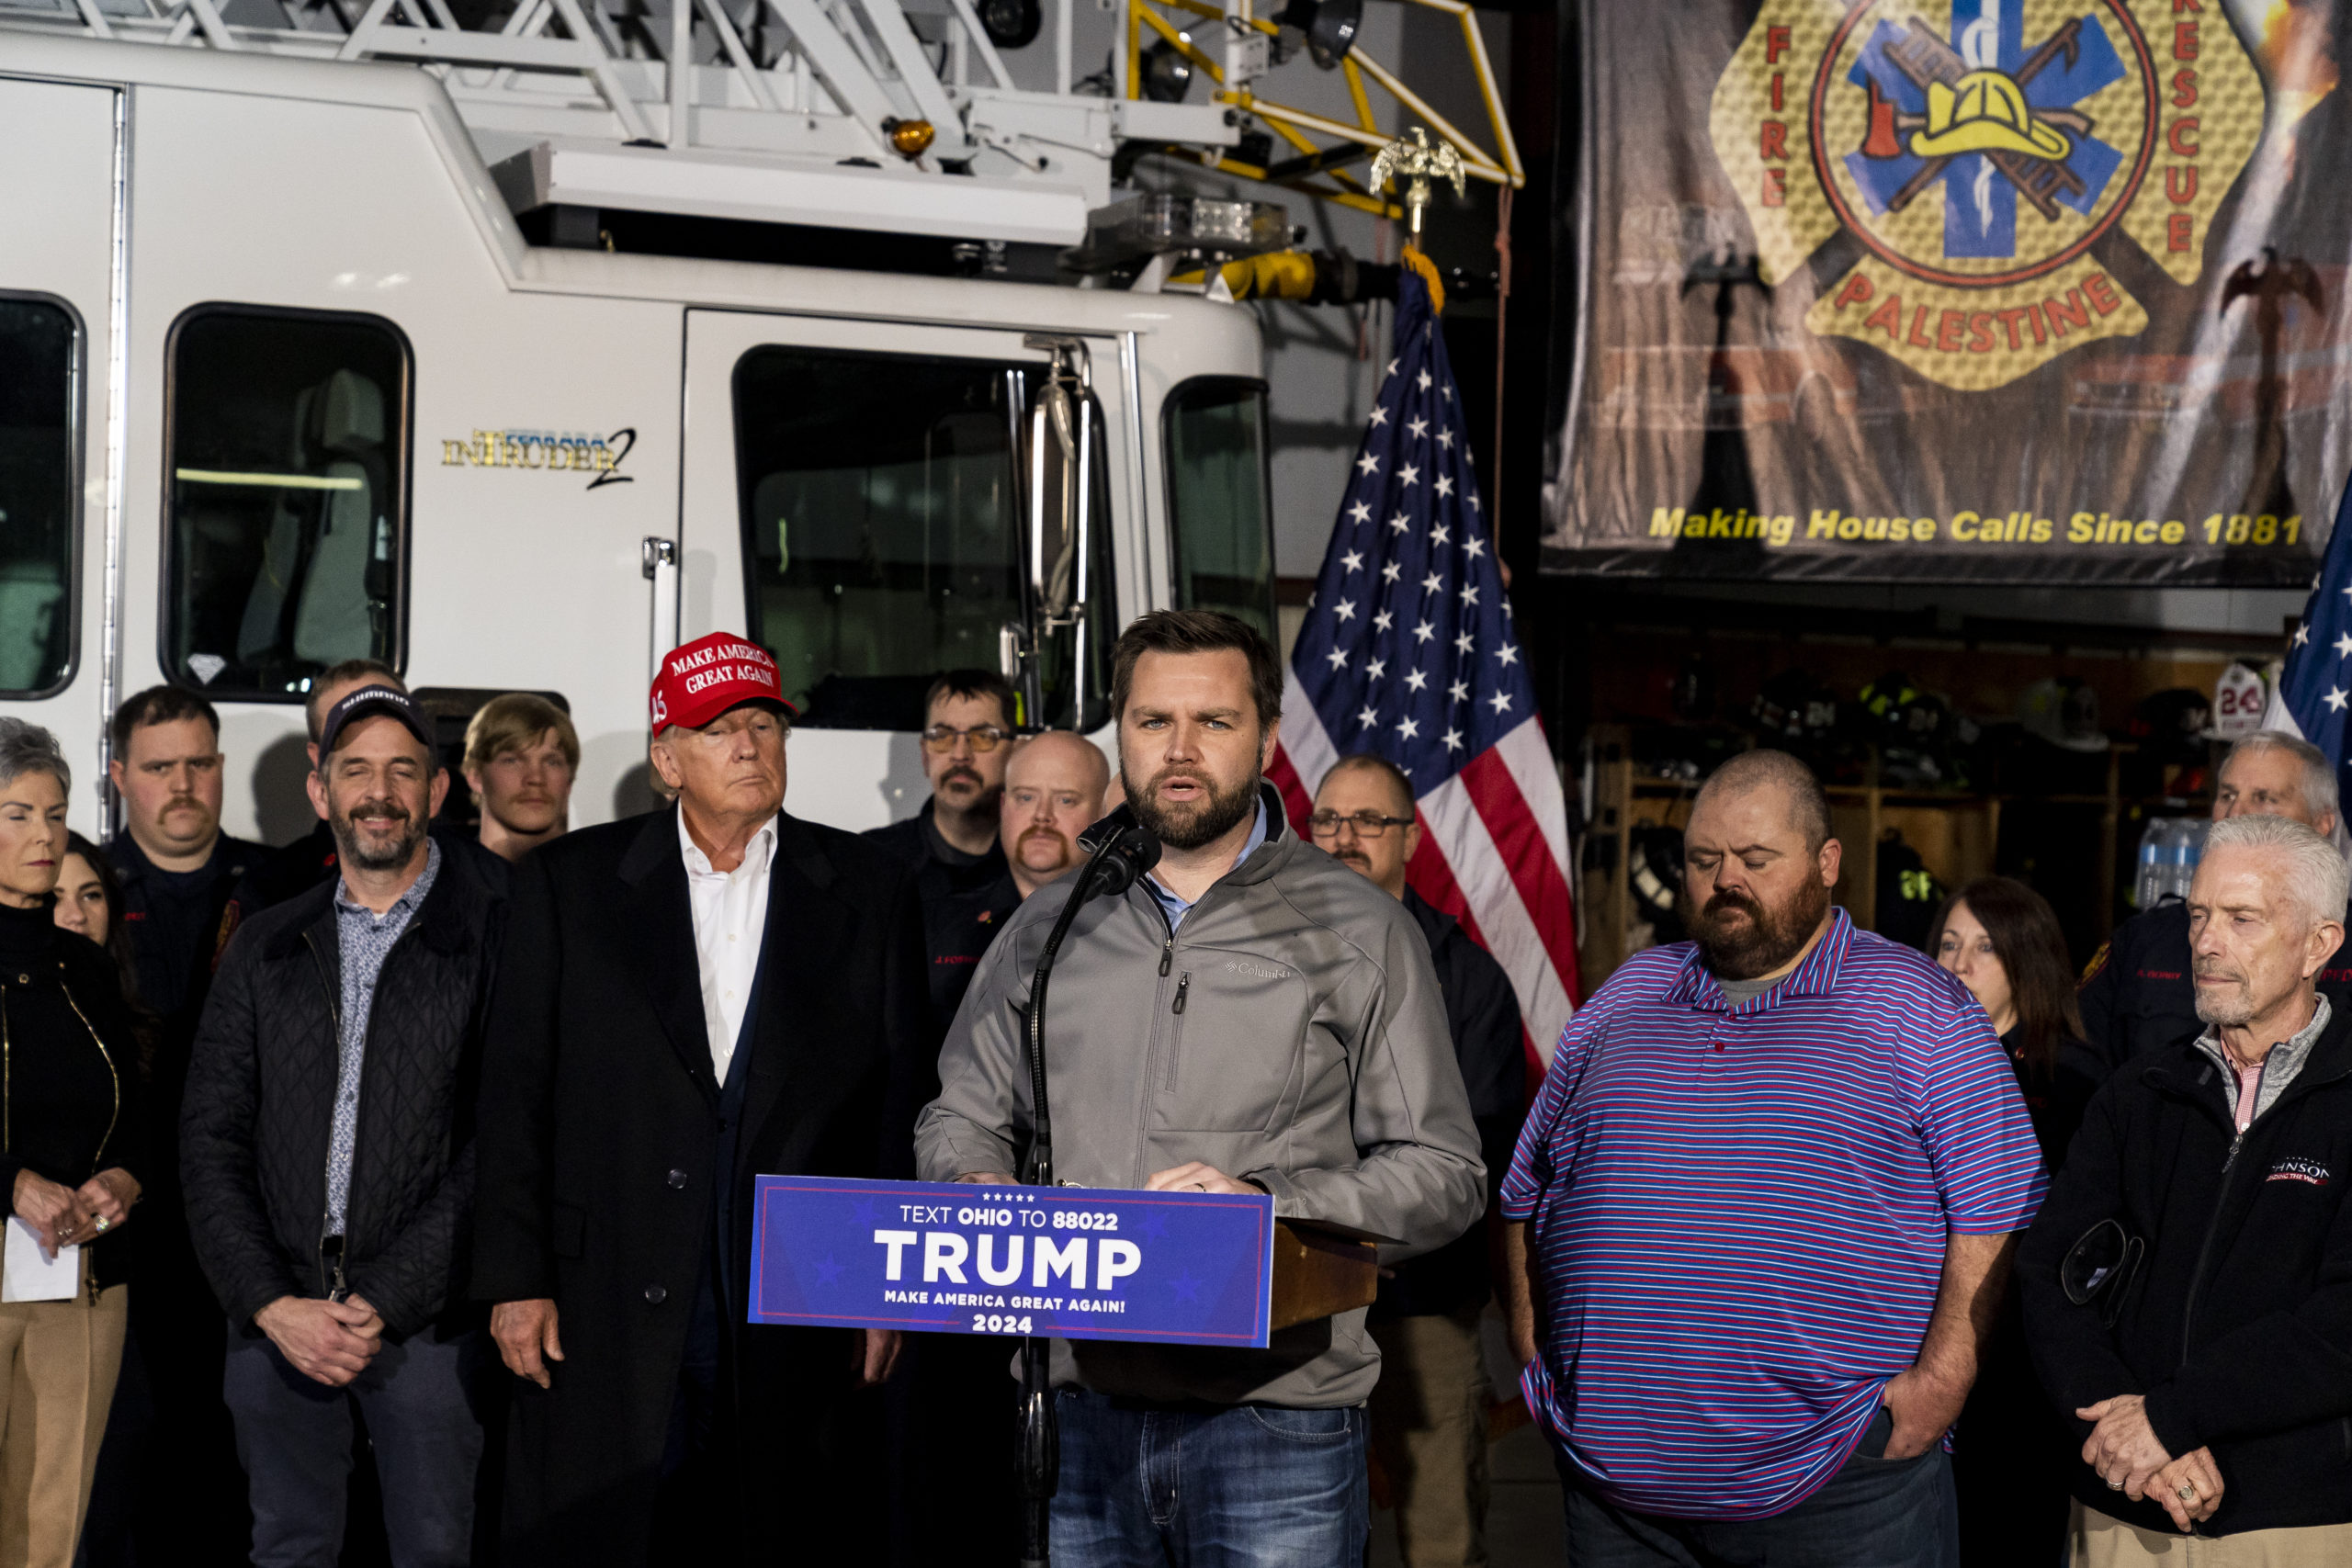 U.S. Senator J.D. Vance delivers remarks to the press along side Former President Donald Trump at the East Palestine Fire Department station on February 22, 2023 in East Palestine, Ohio. On February 3rd, a Norfolk Southern Railways train carrying toxic chemicals derailed causing an environmental disaster. Thousands of residents were ordered to evacuate after the area was placed under a state of emergency and temporary evacuation orders. (Photo by Michael Swensen/Getty Images)